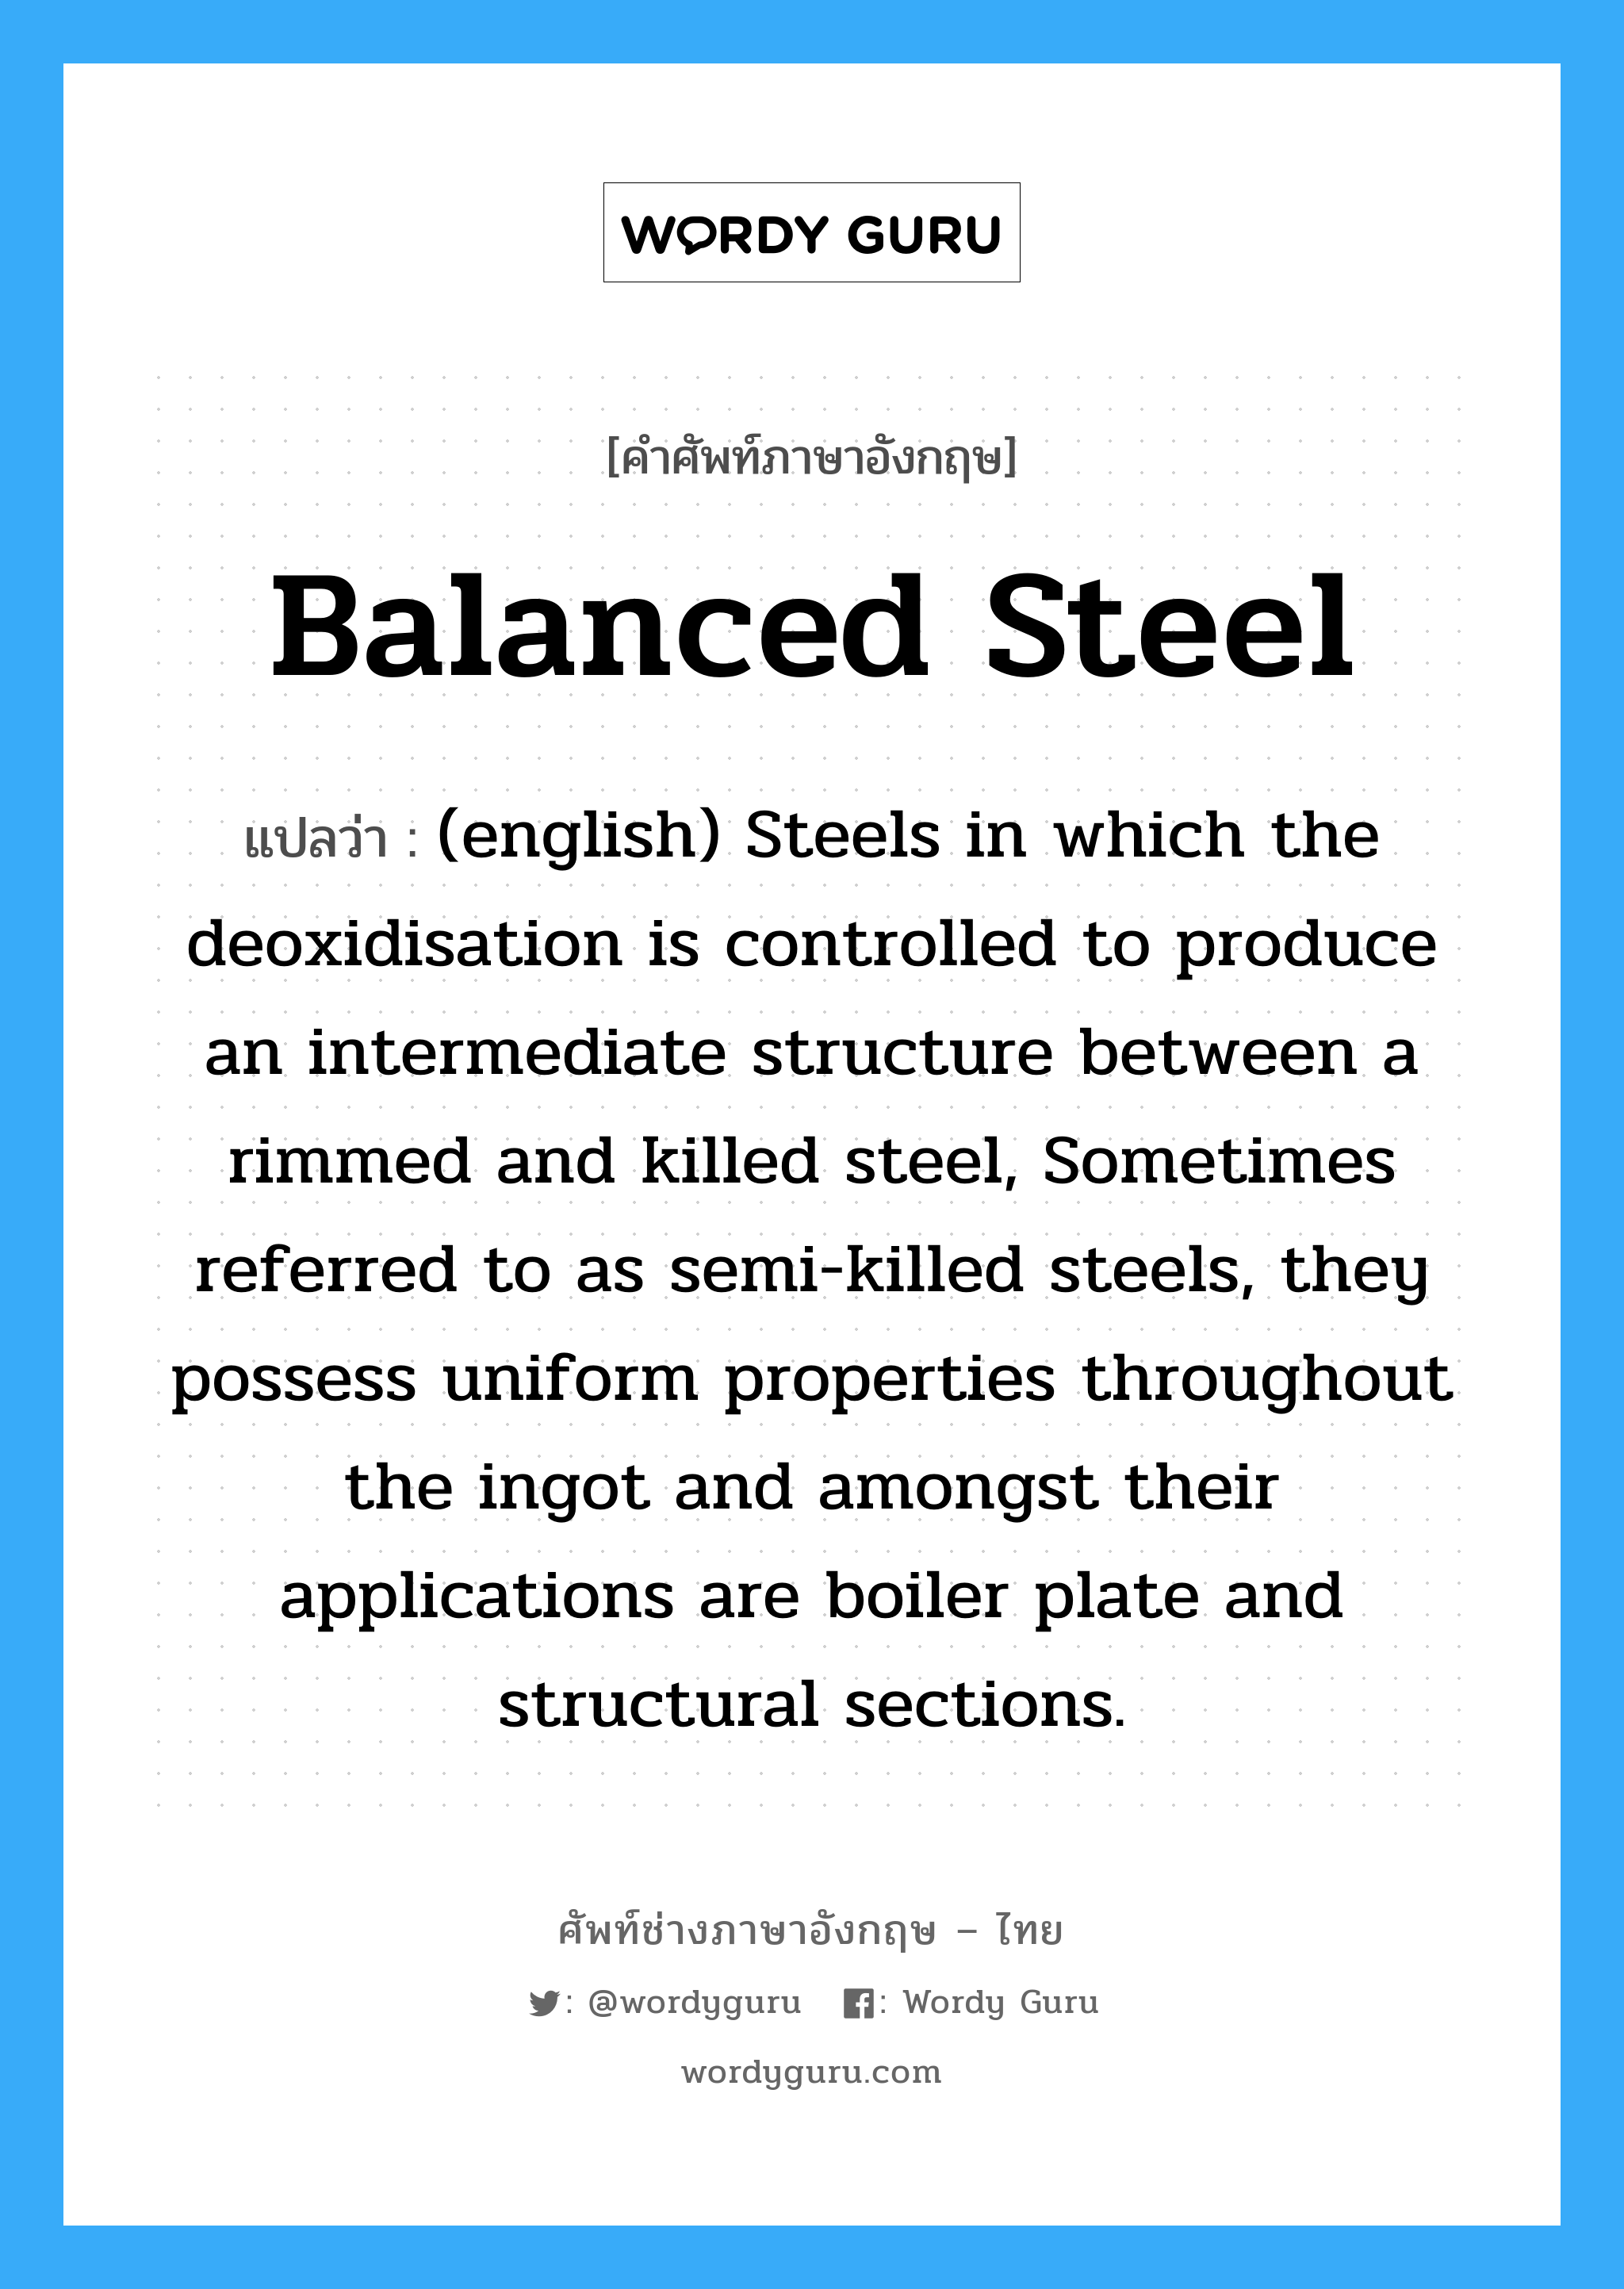 Balanced Steel แปลว่า?, คำศัพท์ช่างภาษาอังกฤษ - ไทย Balanced Steel คำศัพท์ภาษาอังกฤษ Balanced Steel แปลว่า (english) Steels in which the deoxidisation is controlled to produce an intermediate structure between a rimmed and killed steel, Sometimes referred to as semi-killed steels, they possess uniform properties throughout the ingot and amongst their applications are boiler plate and structural sections.